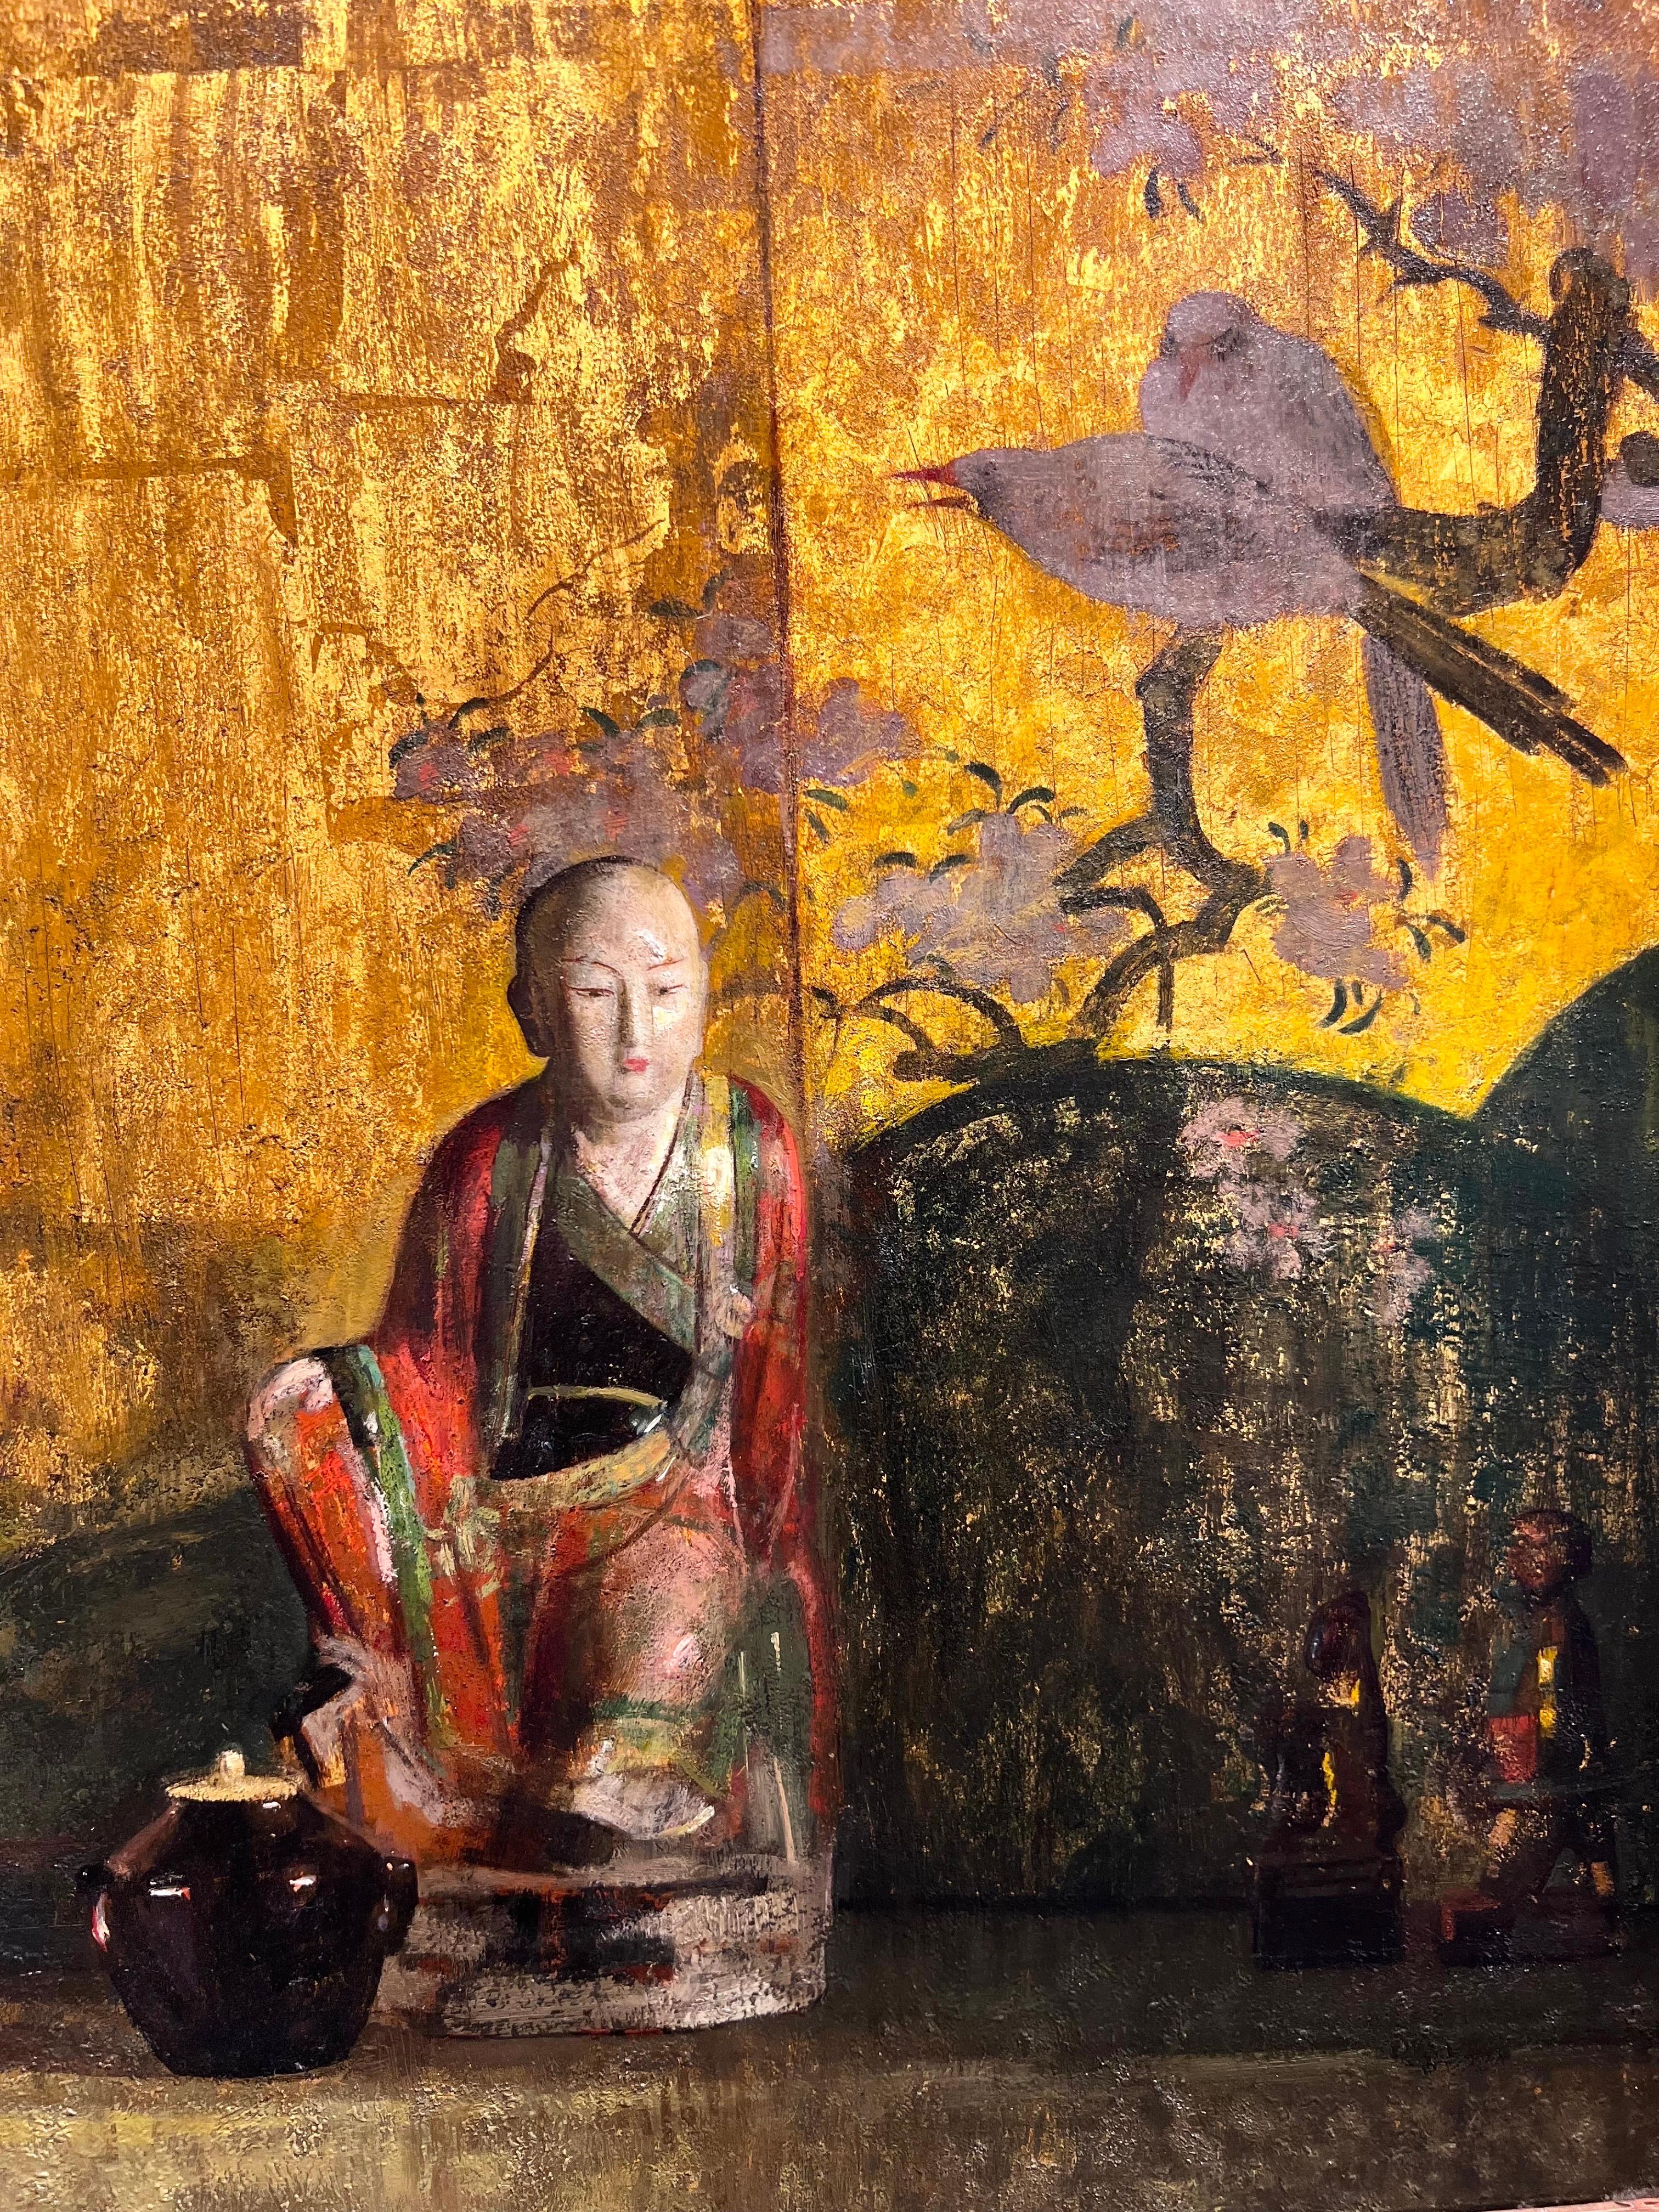 Titled When spring comes. A 20th-century American oil painting on board signed lower left. It depicts a still life with a porcelain Buddha figure and a pottery jar in front of a gilded screen. The painting measures 24